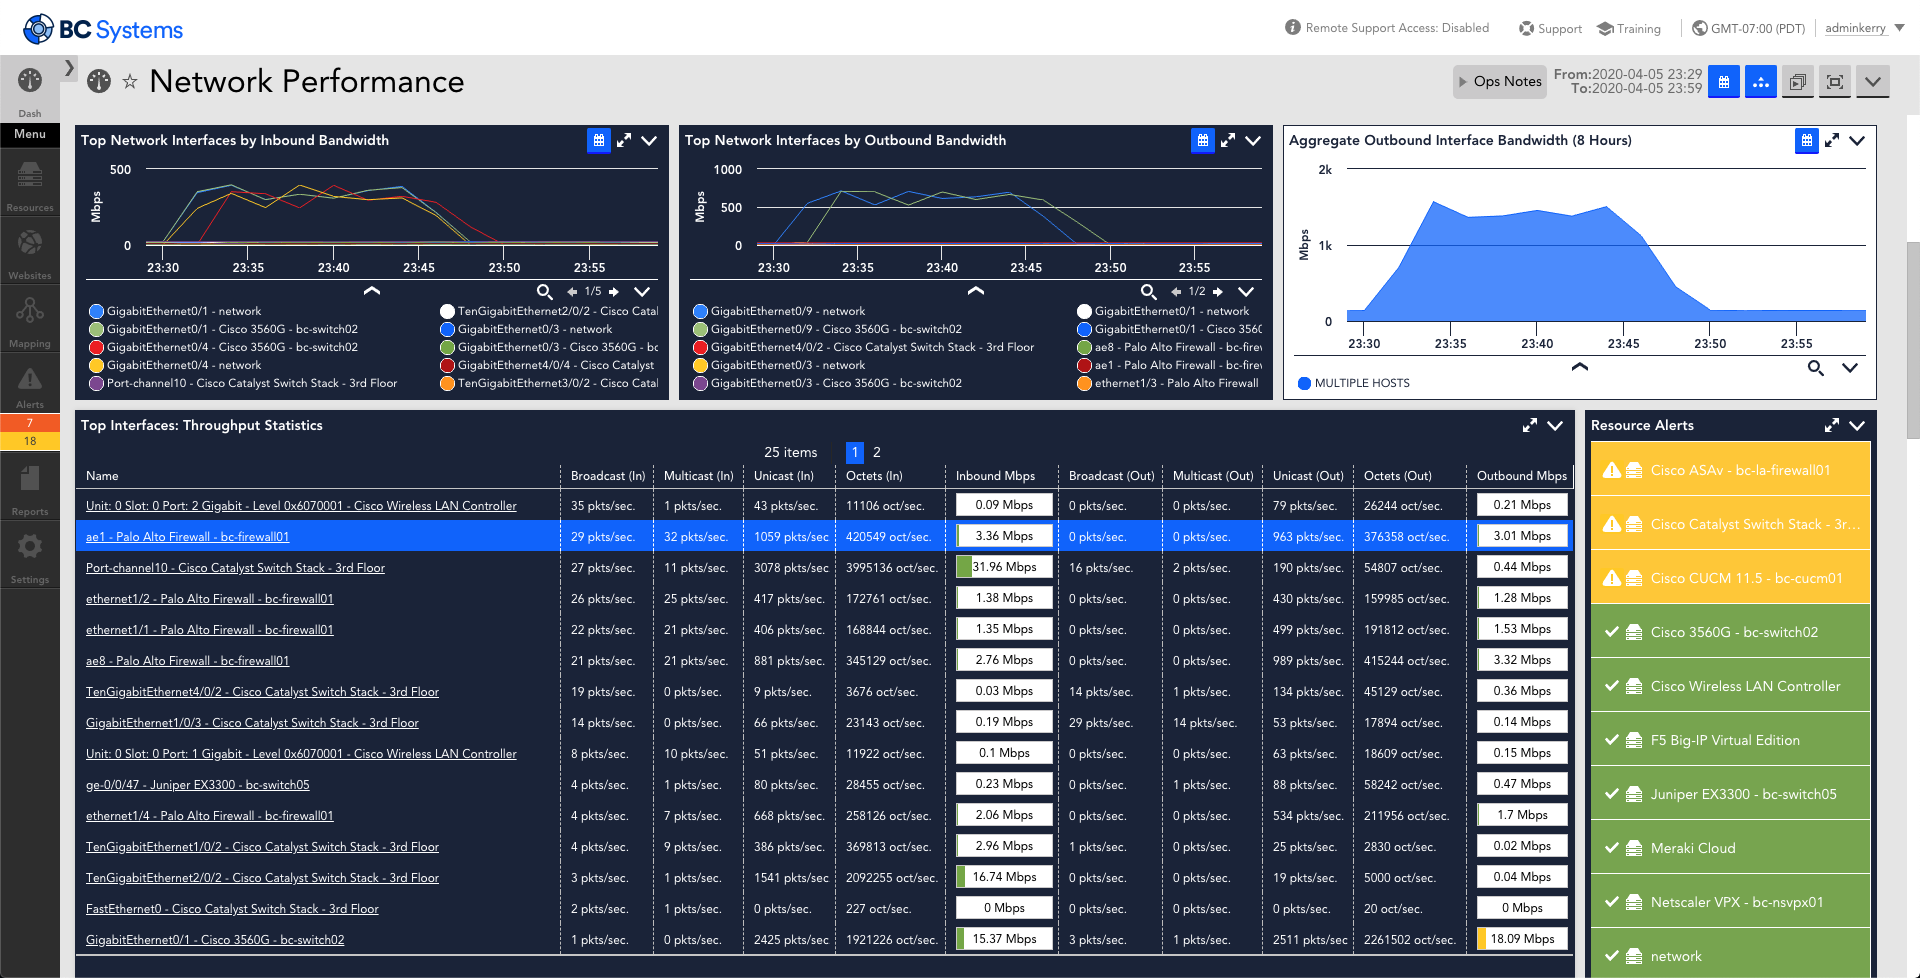 http://This%20dashboard%20provides%20an%20a%20listing%20of%20various%20metrics%20that%20are%20monitored%20for%20Network%20Performance.%20The%20metrics%20displayed%20are%20interface%20inbound%20bandwidth%20over%20time,%20interface%20outbound%20bandwidth%20over%20time,%20real-time%20interface%20statistics,%20status